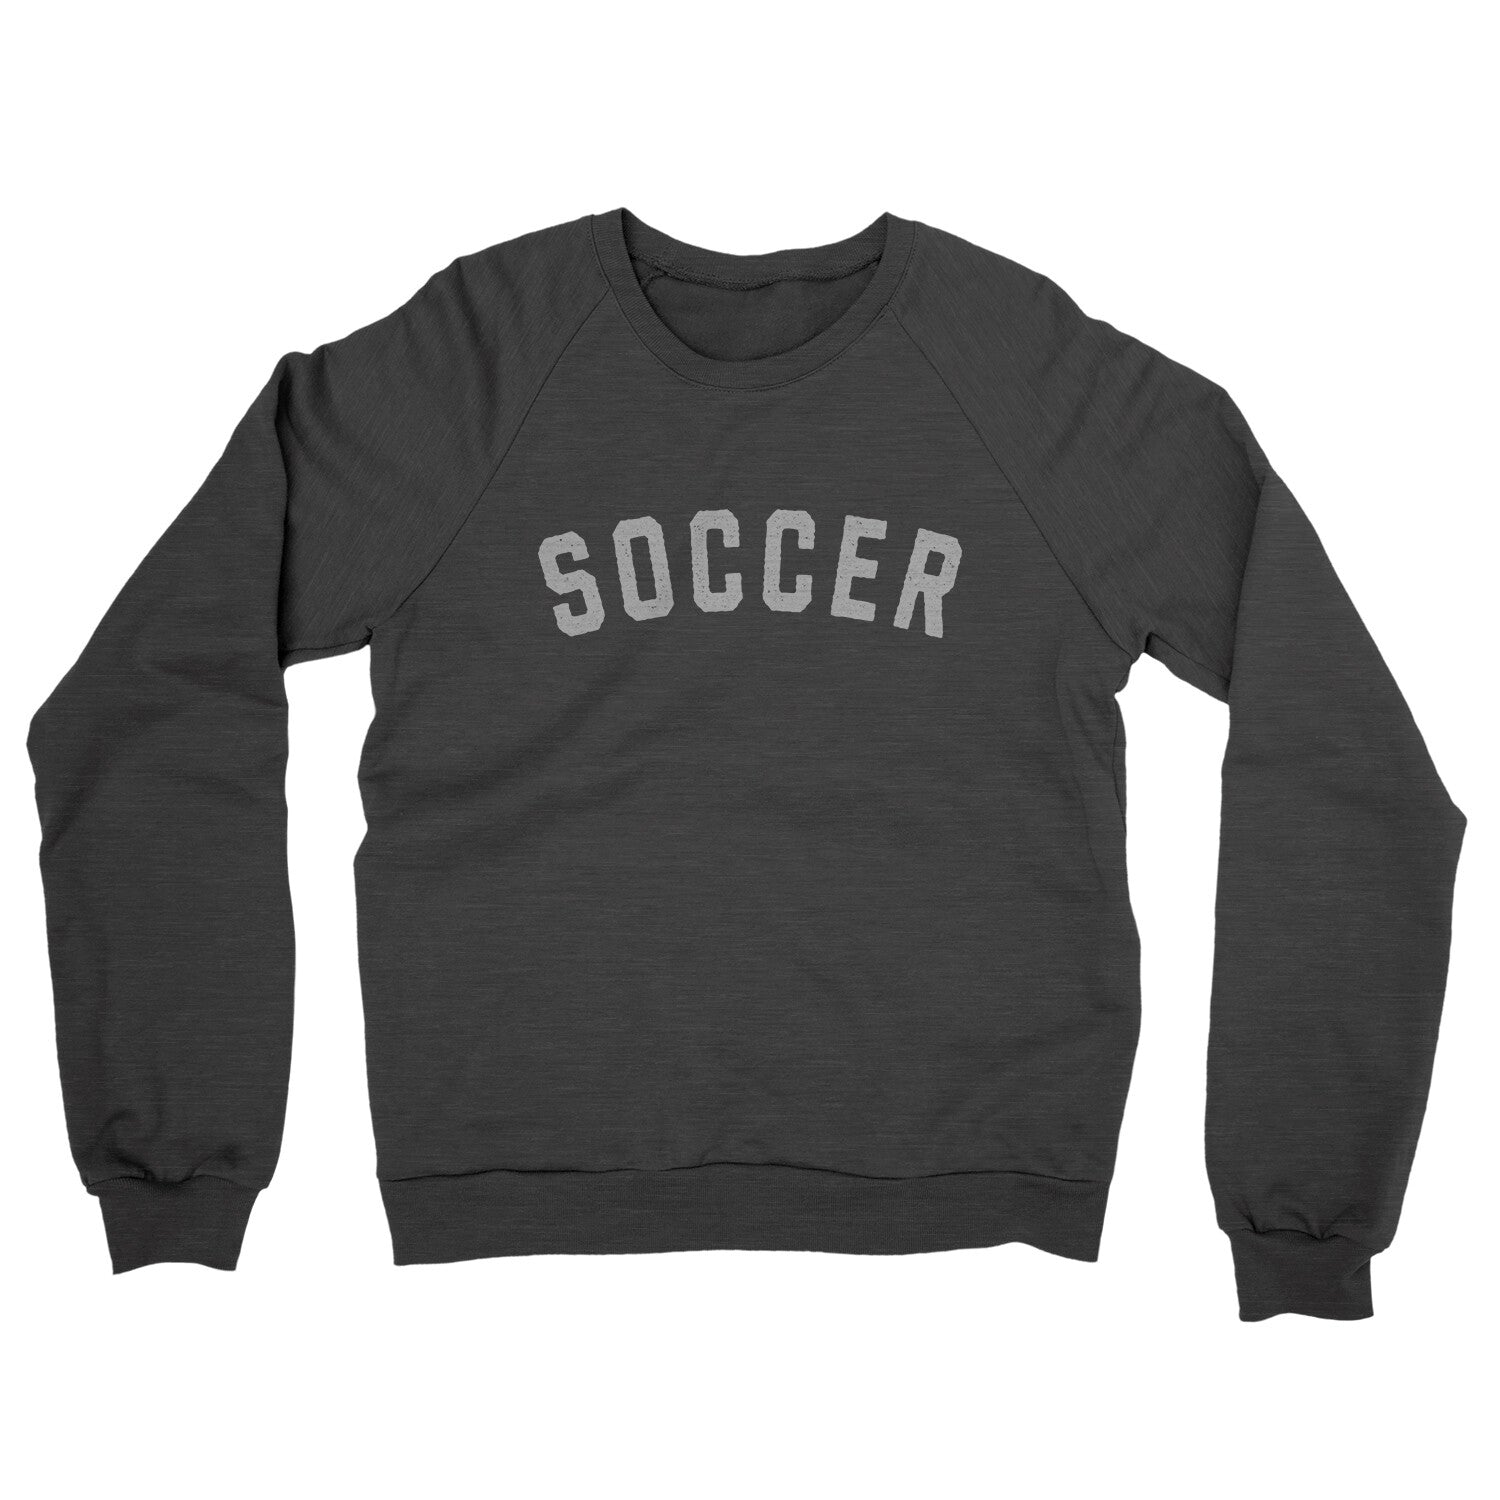 Soccer in Charcoal Heather Color